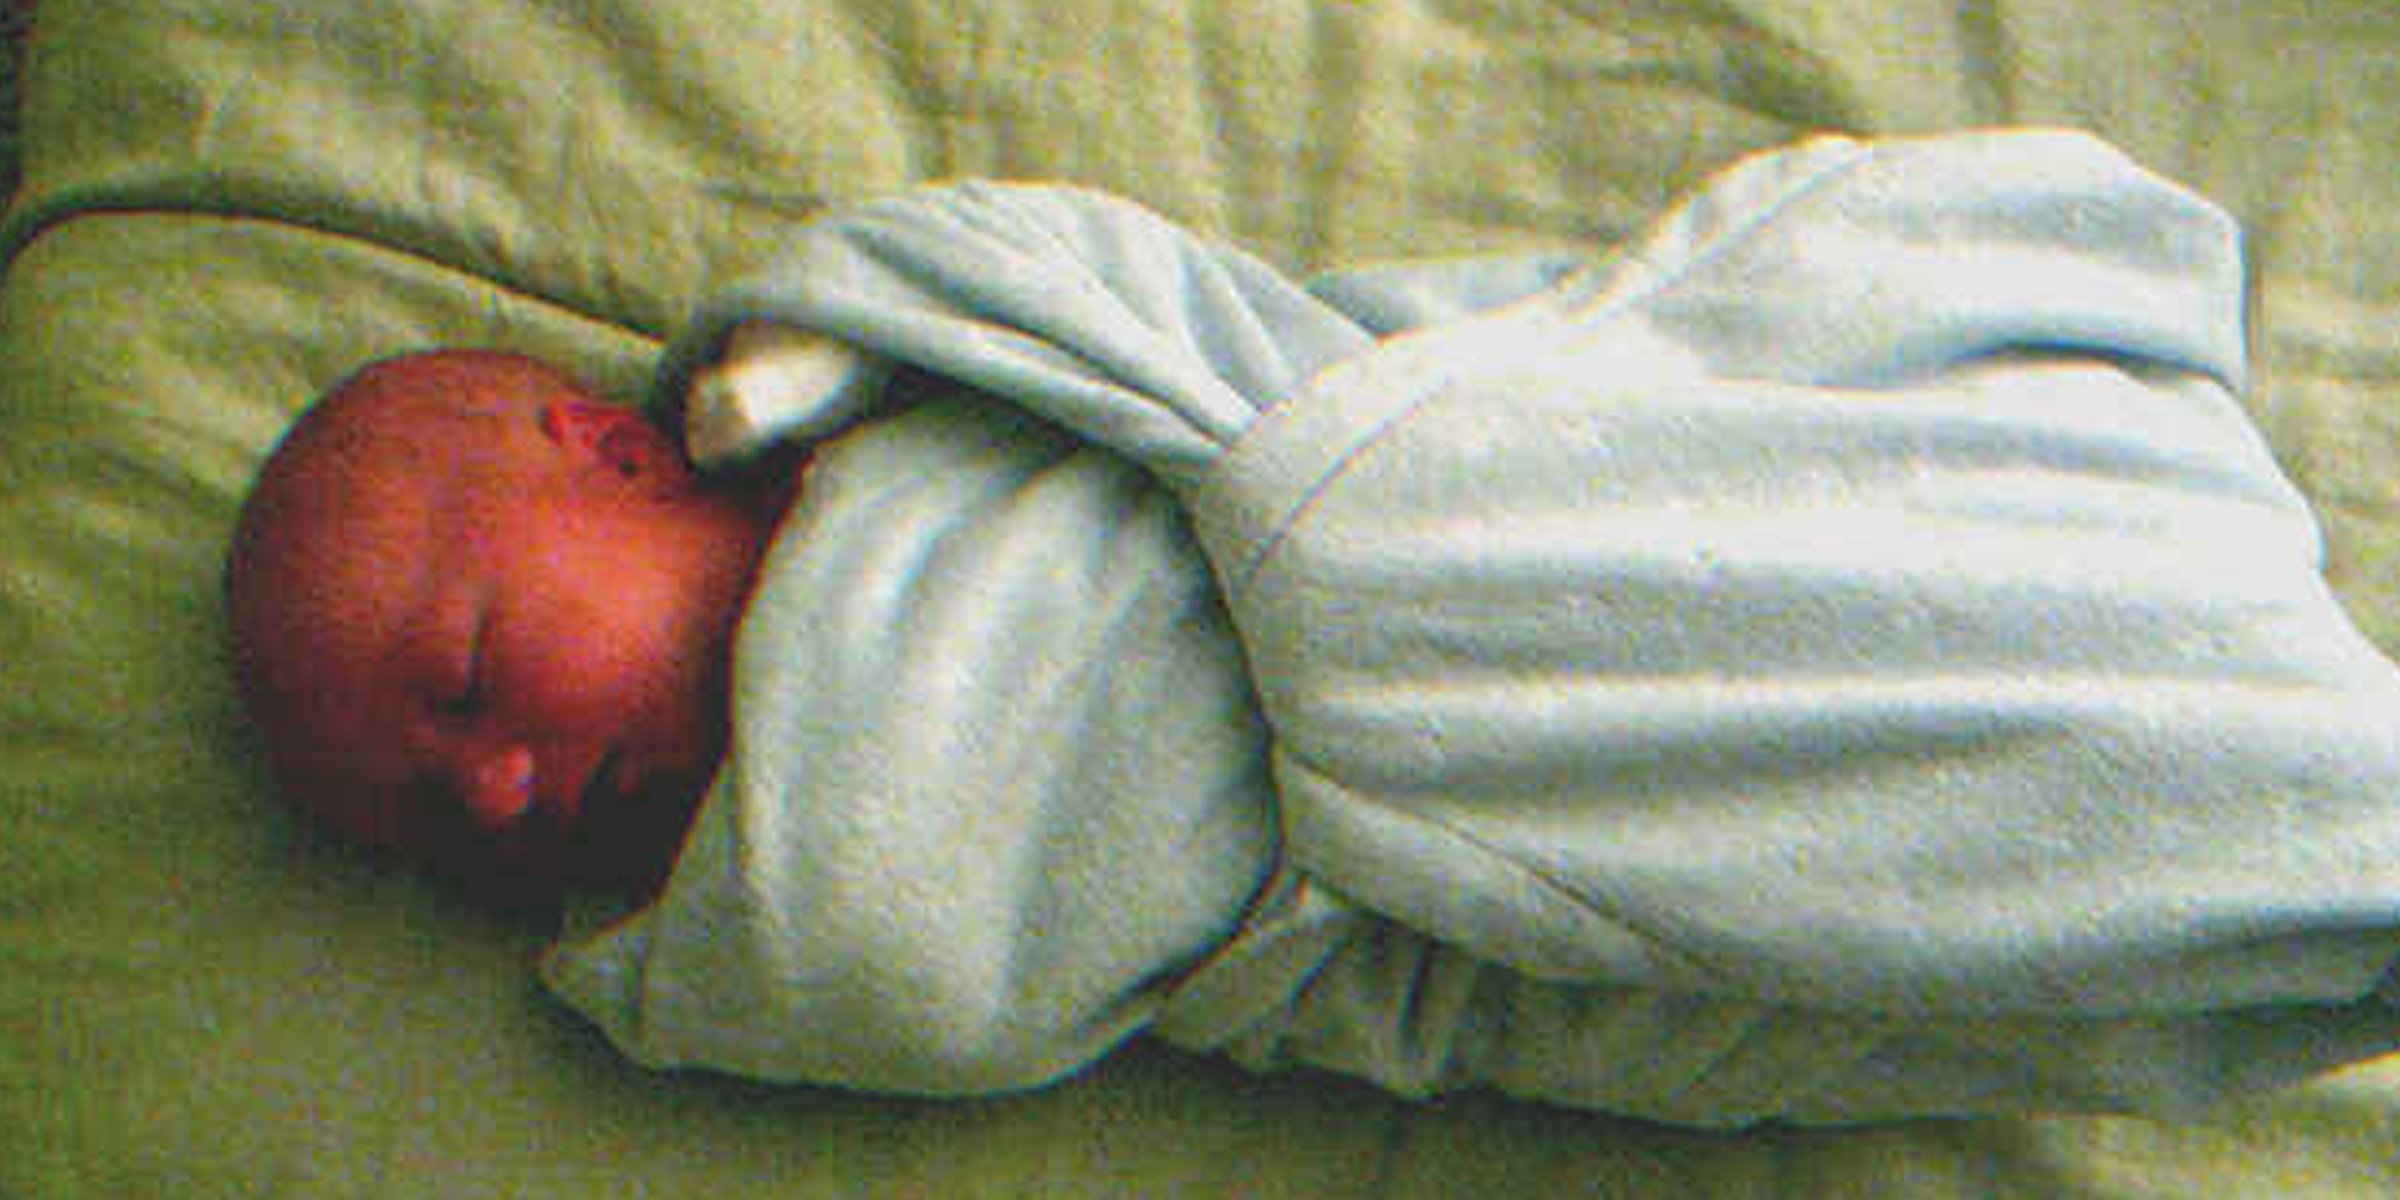 A baby on a bed | Source: Flickr/Jason Lander (CC BY 2.0)